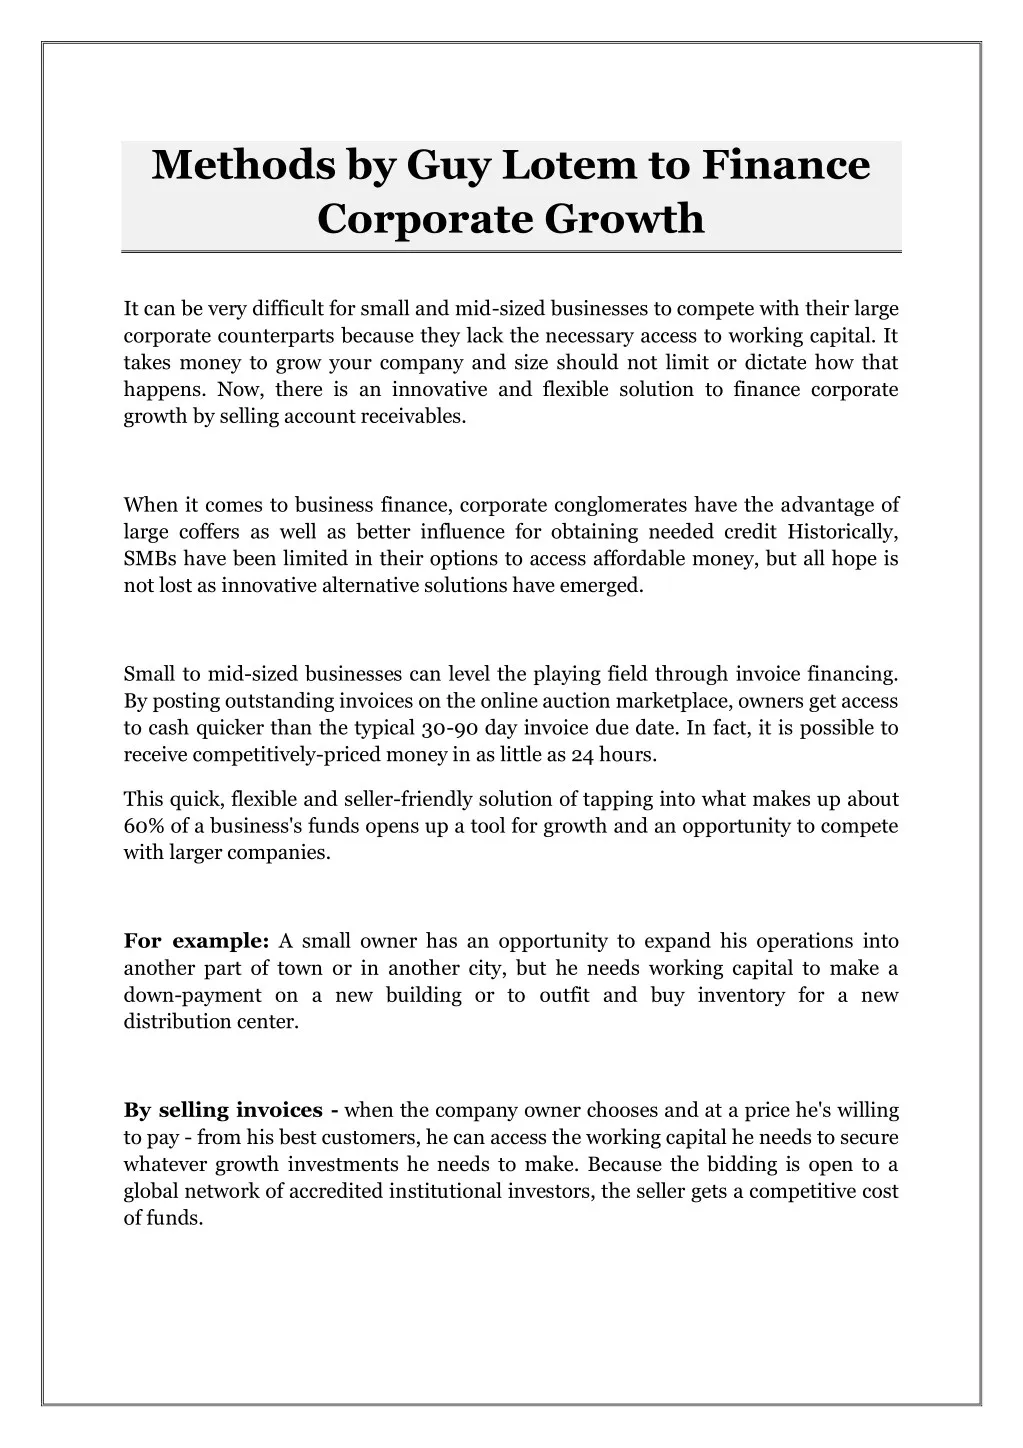 methods by guy lotem to finance corporate growth